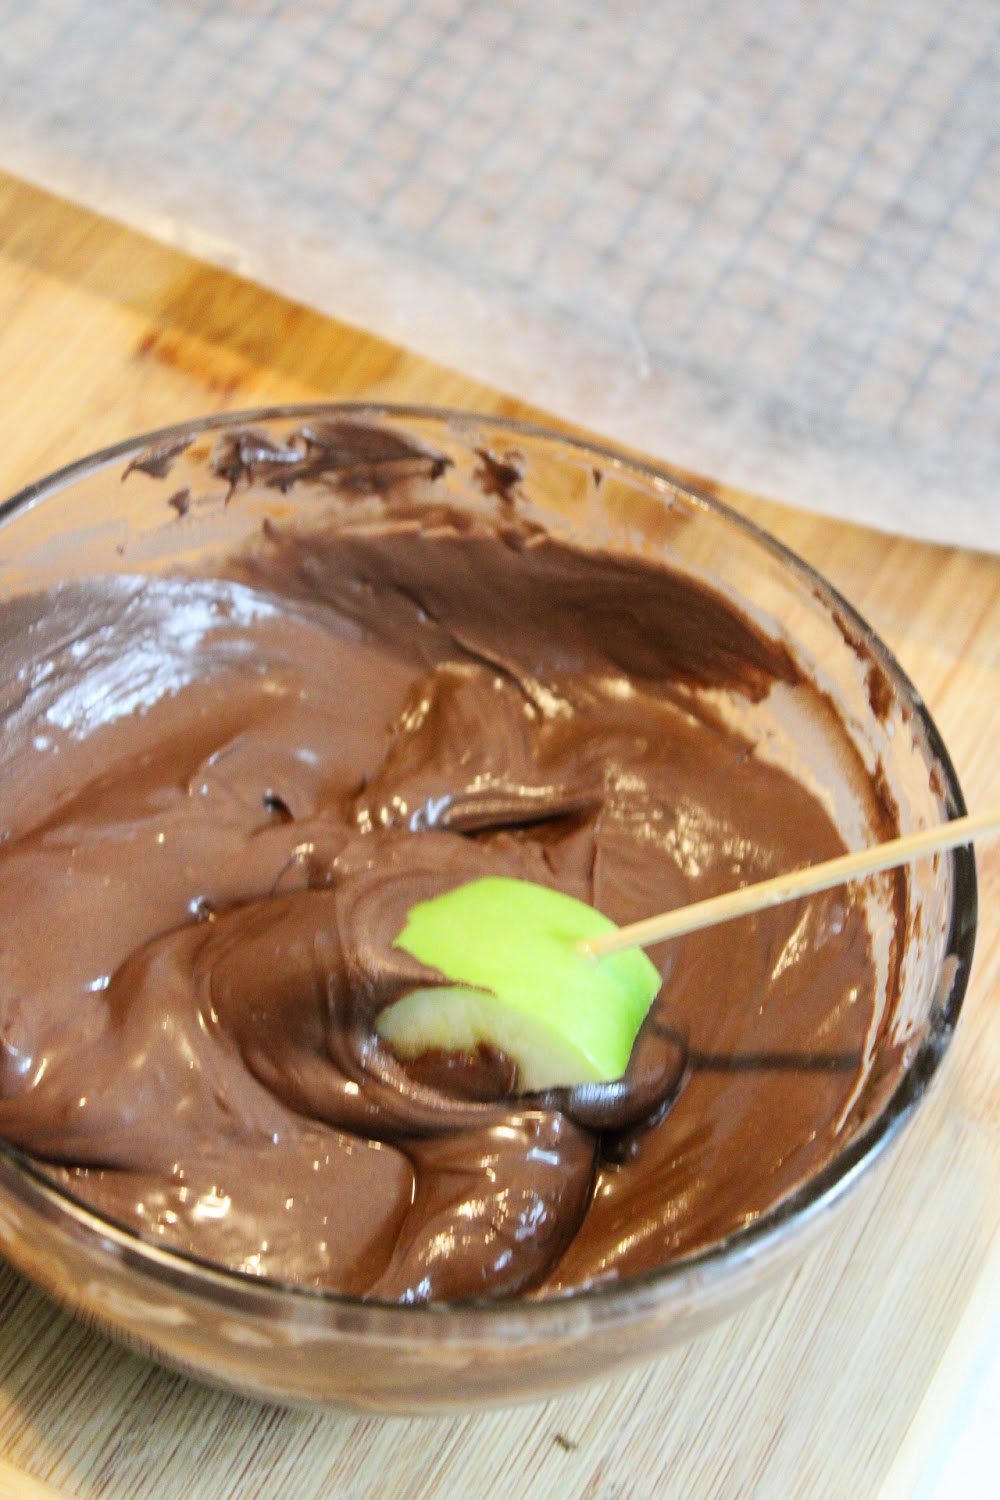 dip the apple slice into the melted chocolate.